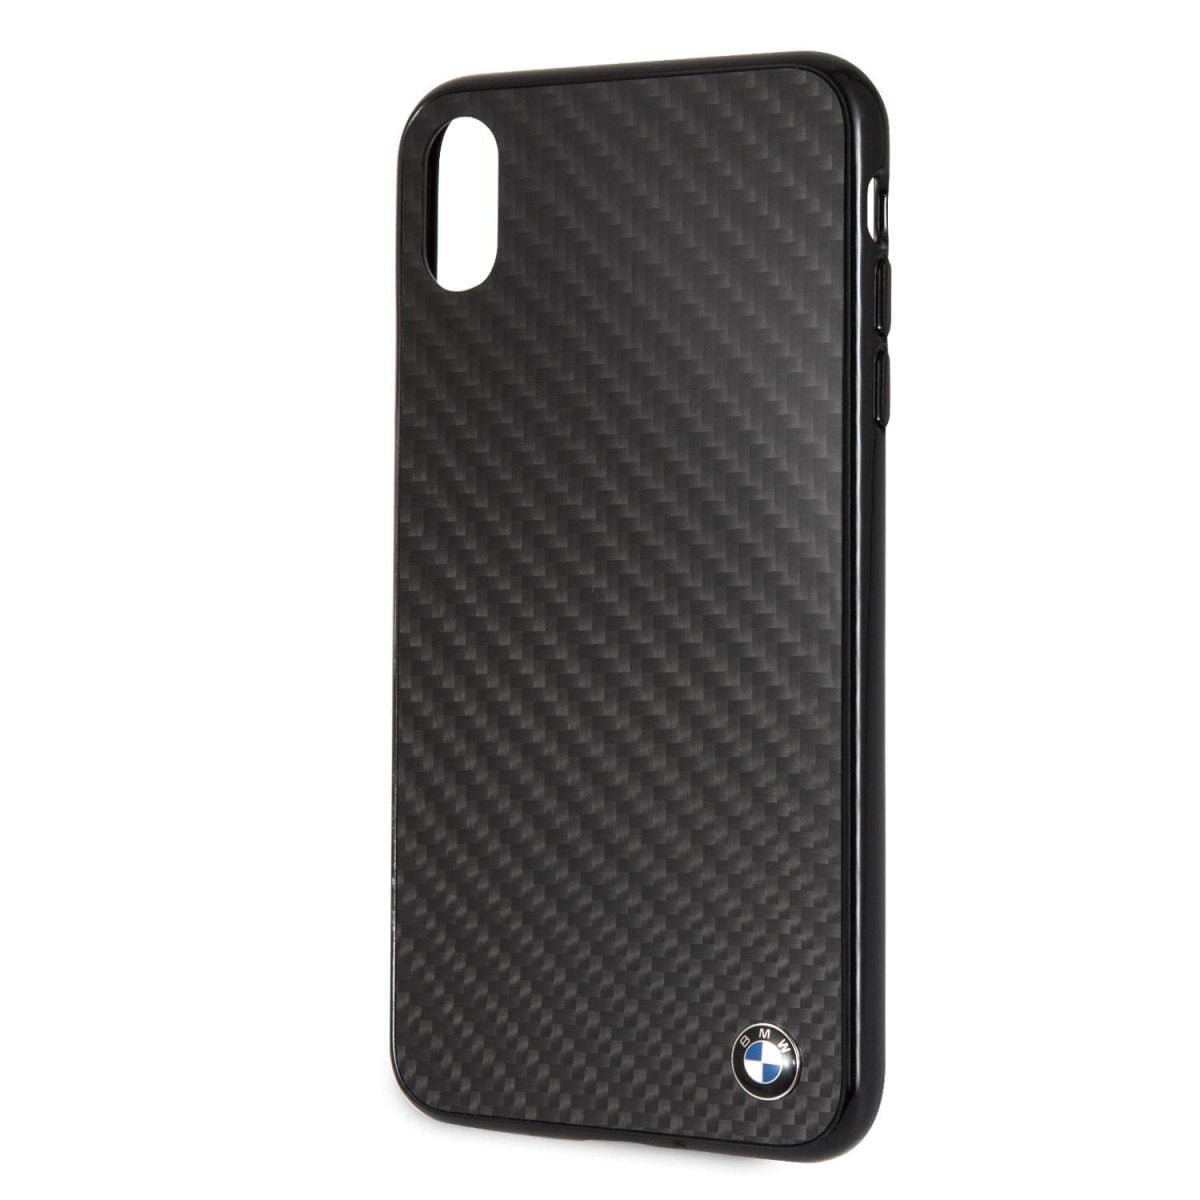 Cg Mobile Bmw Iphone Xs Max Case Black Carbon Hard Cell Phone Case Carbon Fiber Easily Accessible Ports Officially Licensed 03 غطاء آيفون ايفون Xs ألياف الكربون السوداء (Bmw)